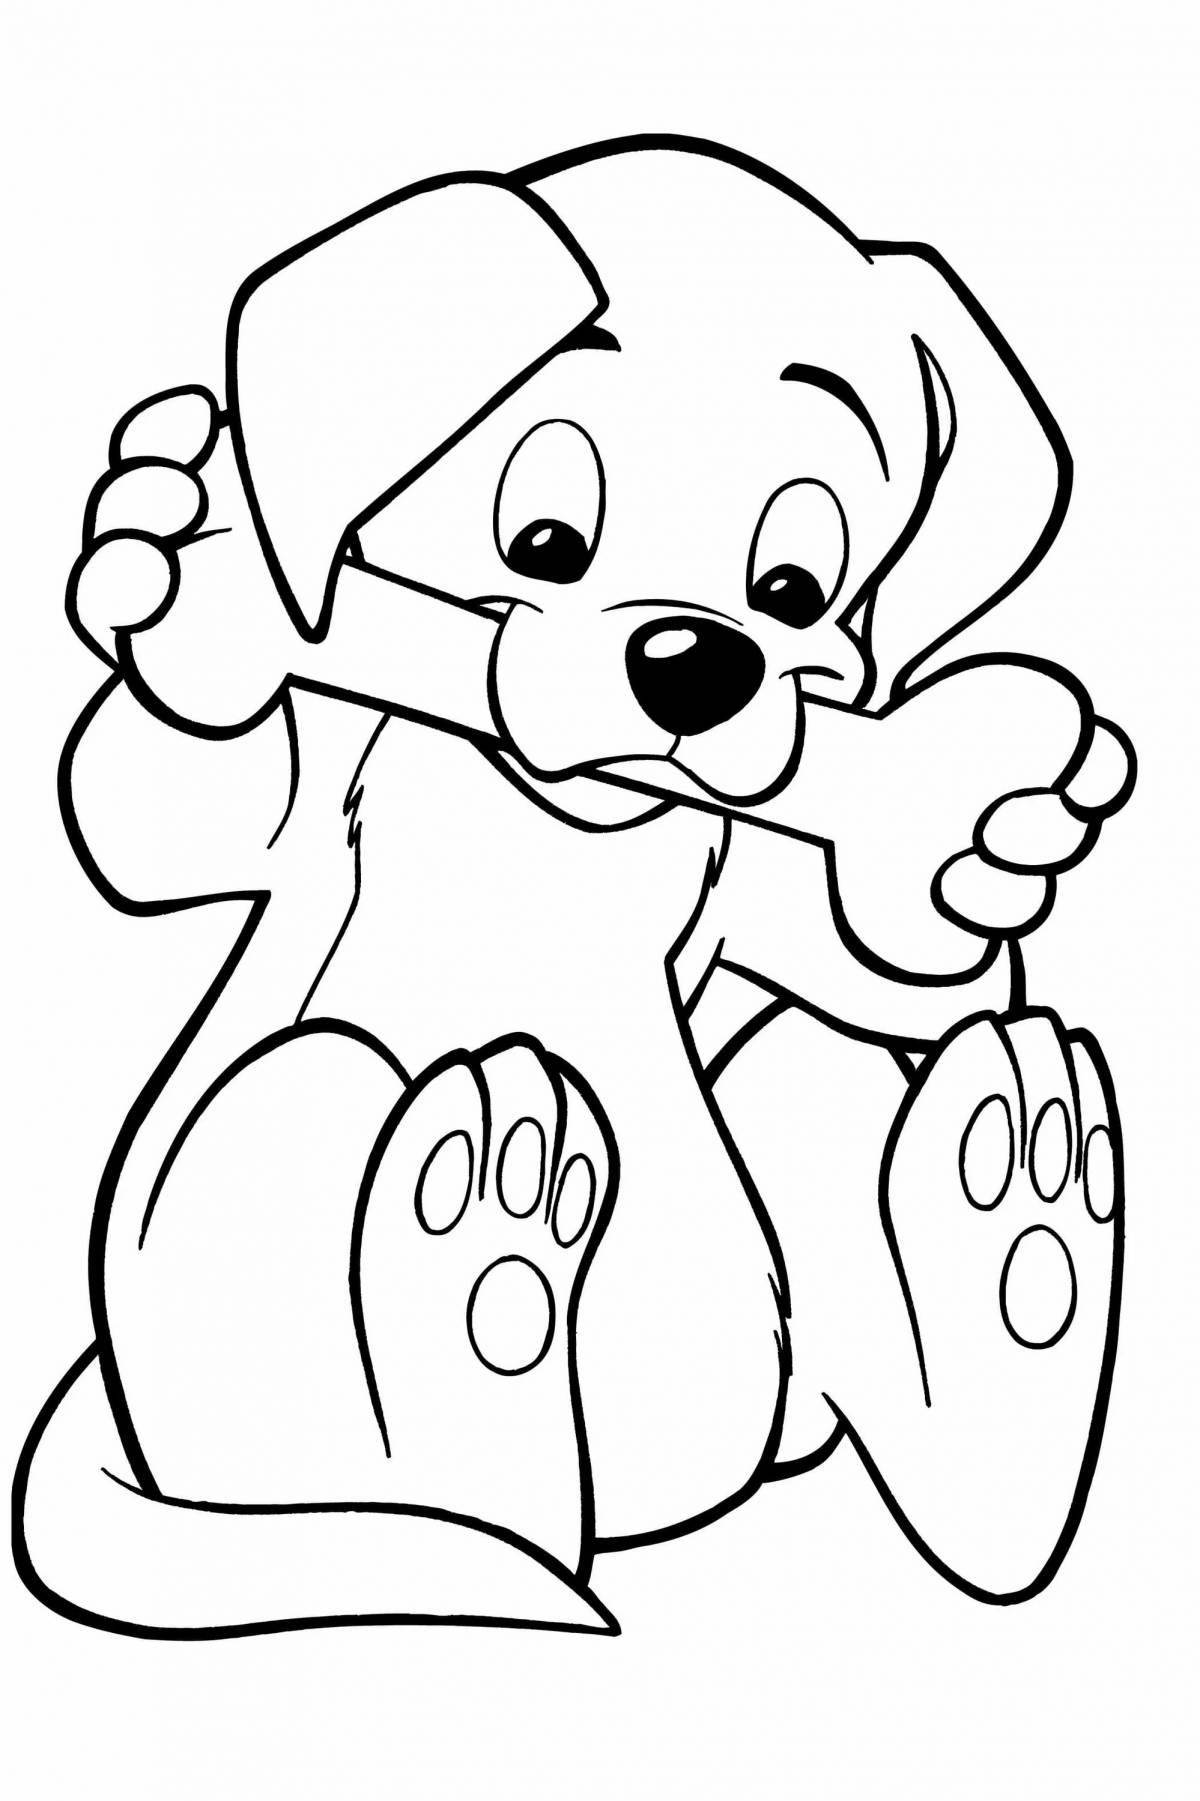 Friendly dog ​​coloring book for kids